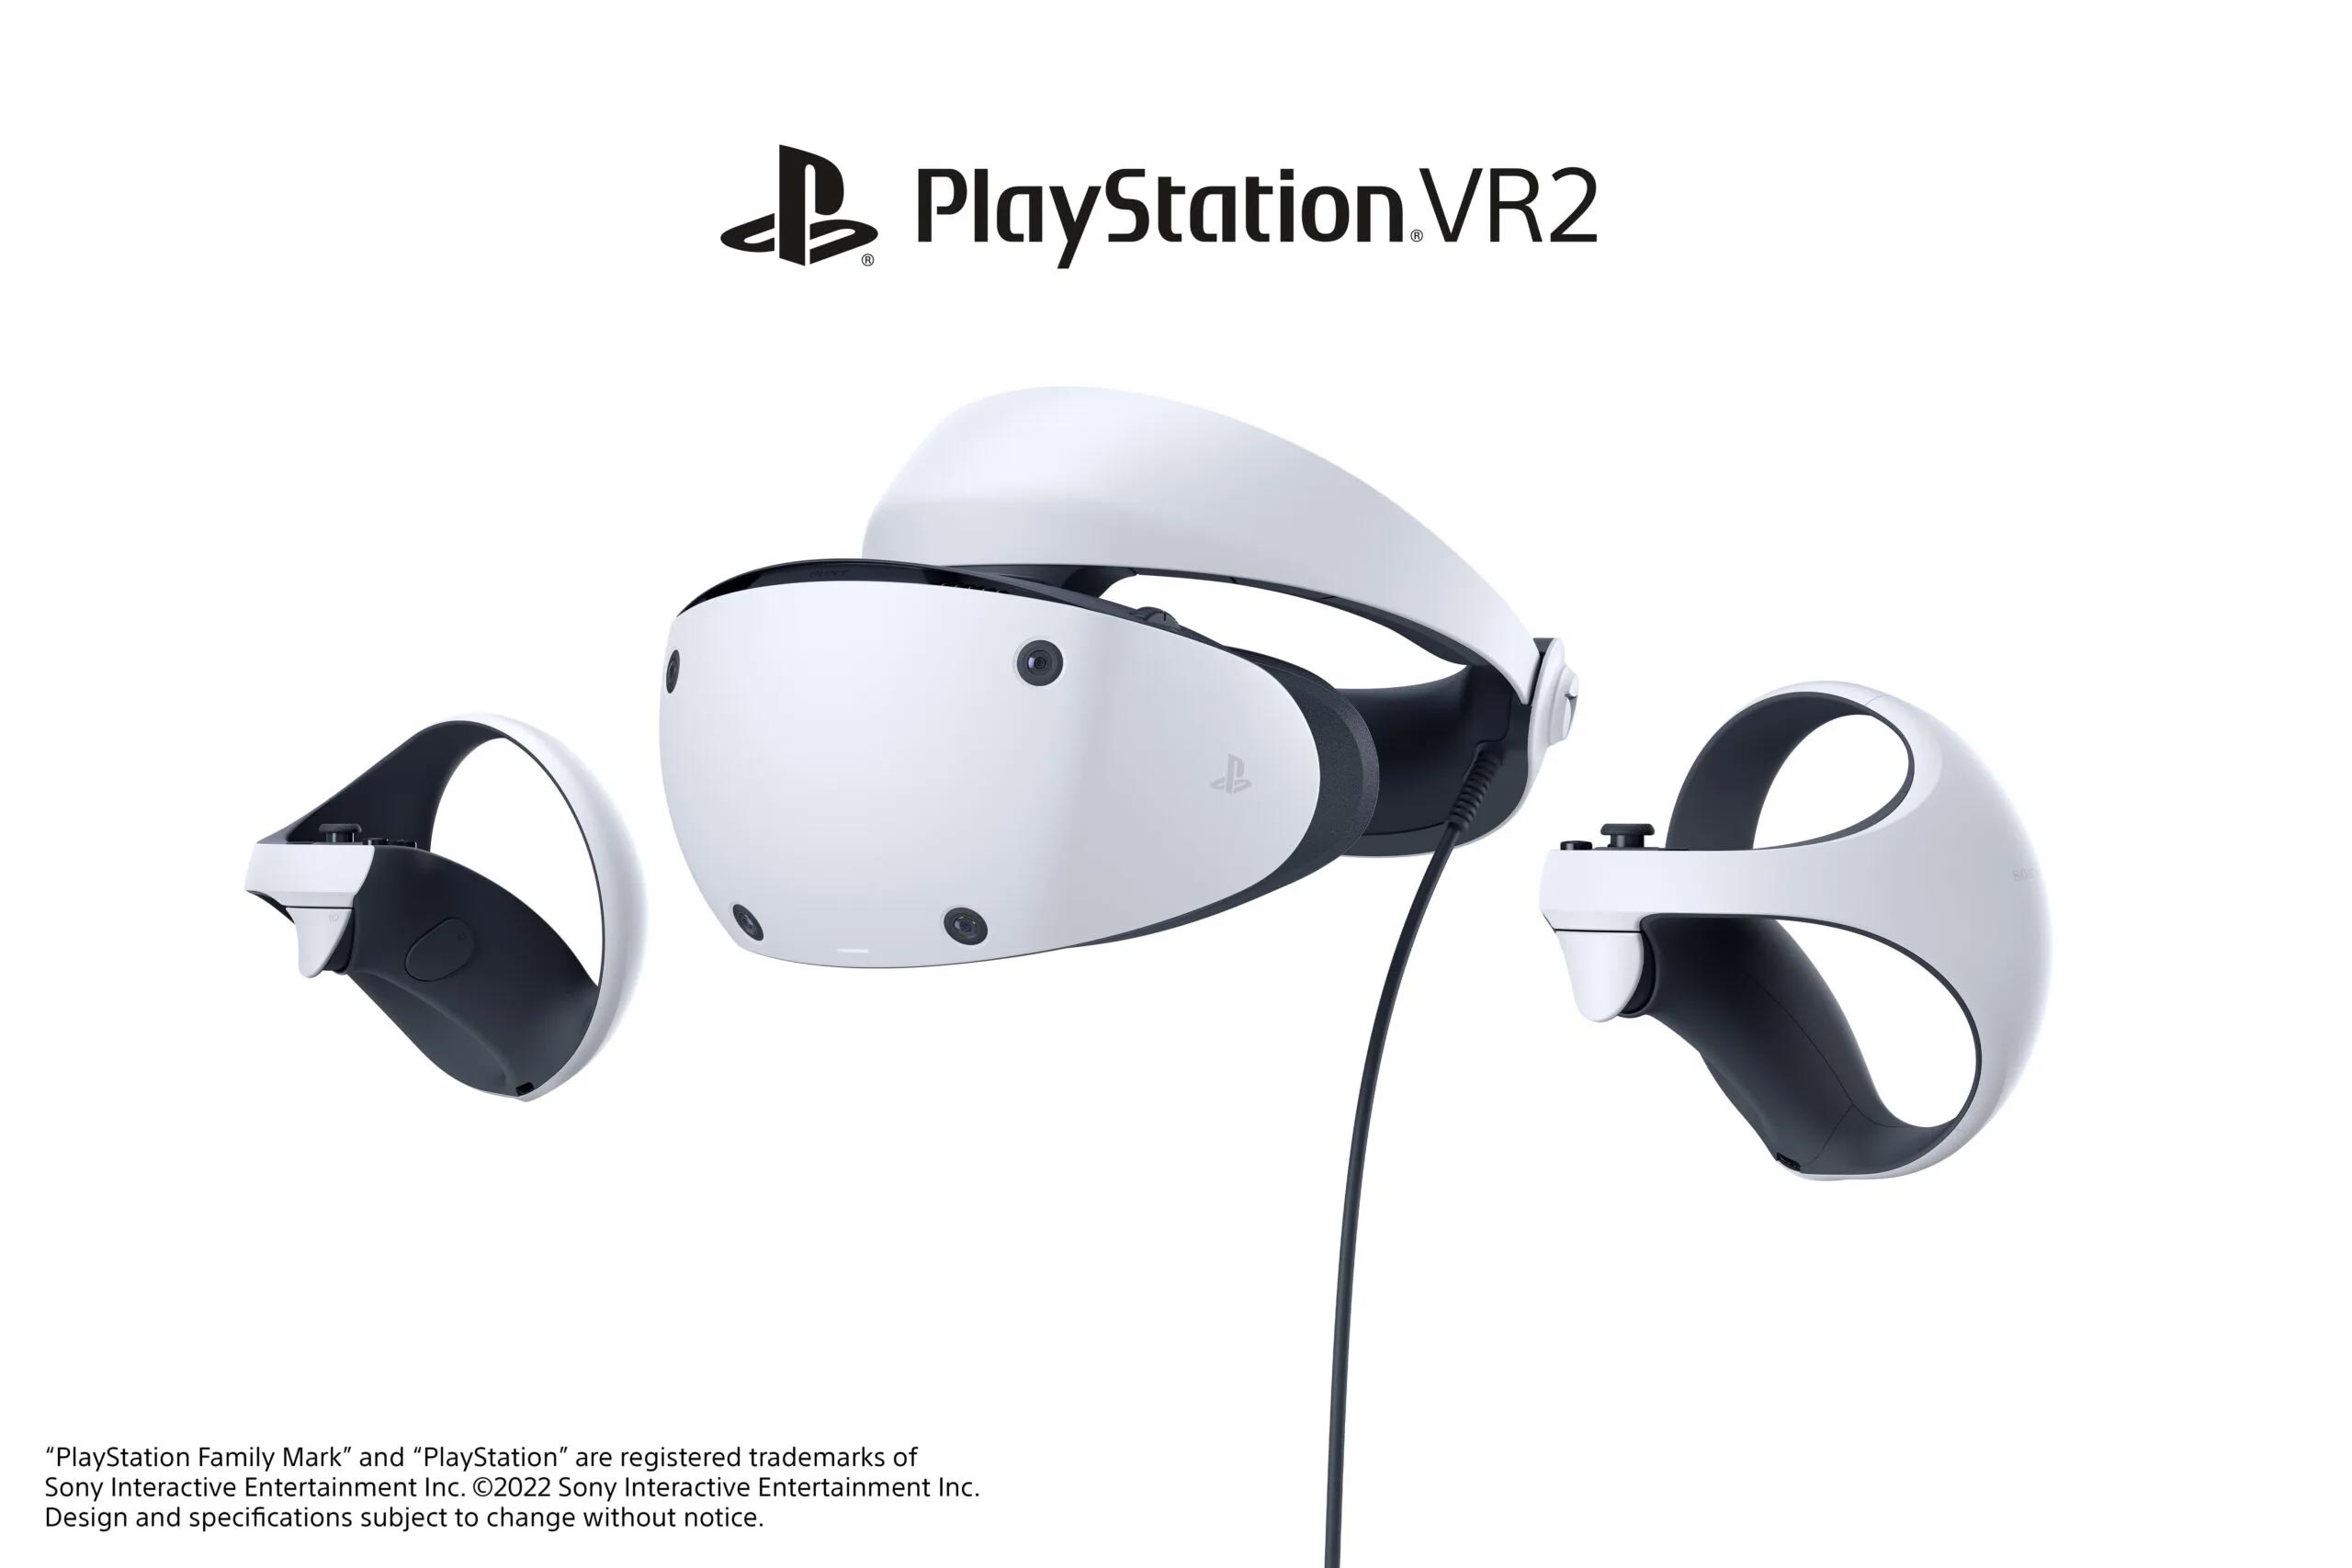 playstation vr 2 headset unveiled